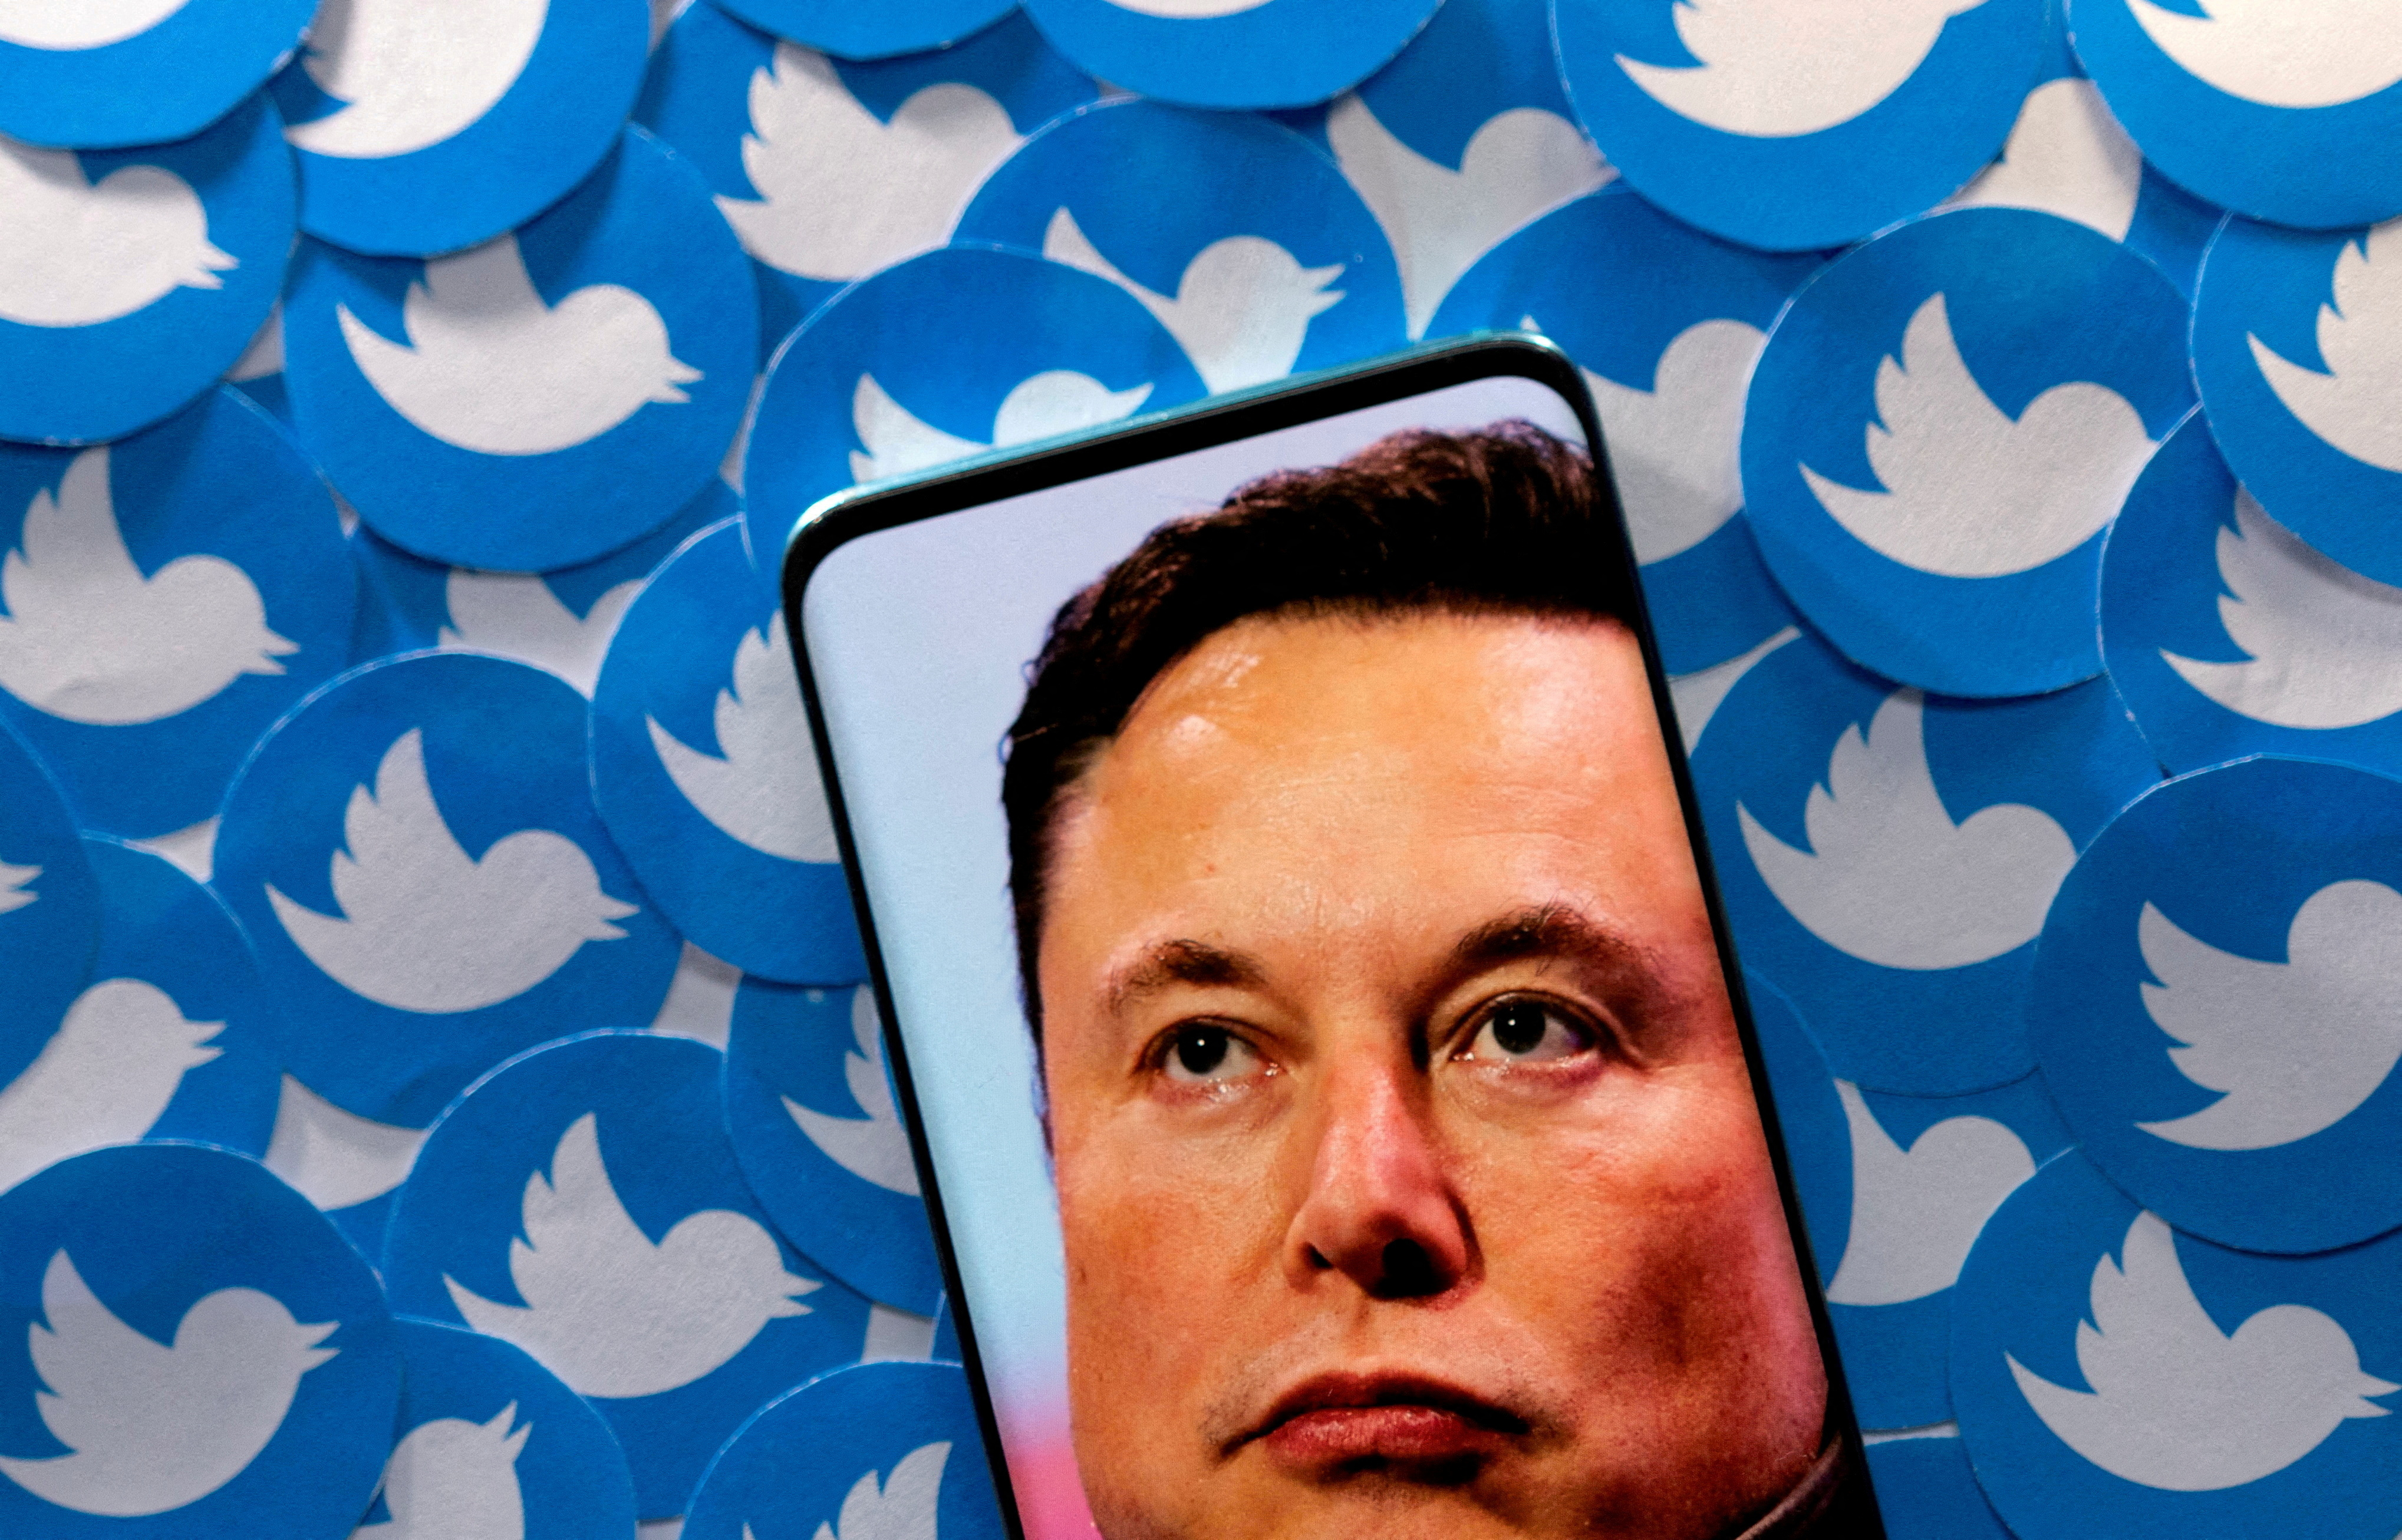 Twitter suspends several journalists, Musk cites “doxxing” of his jet